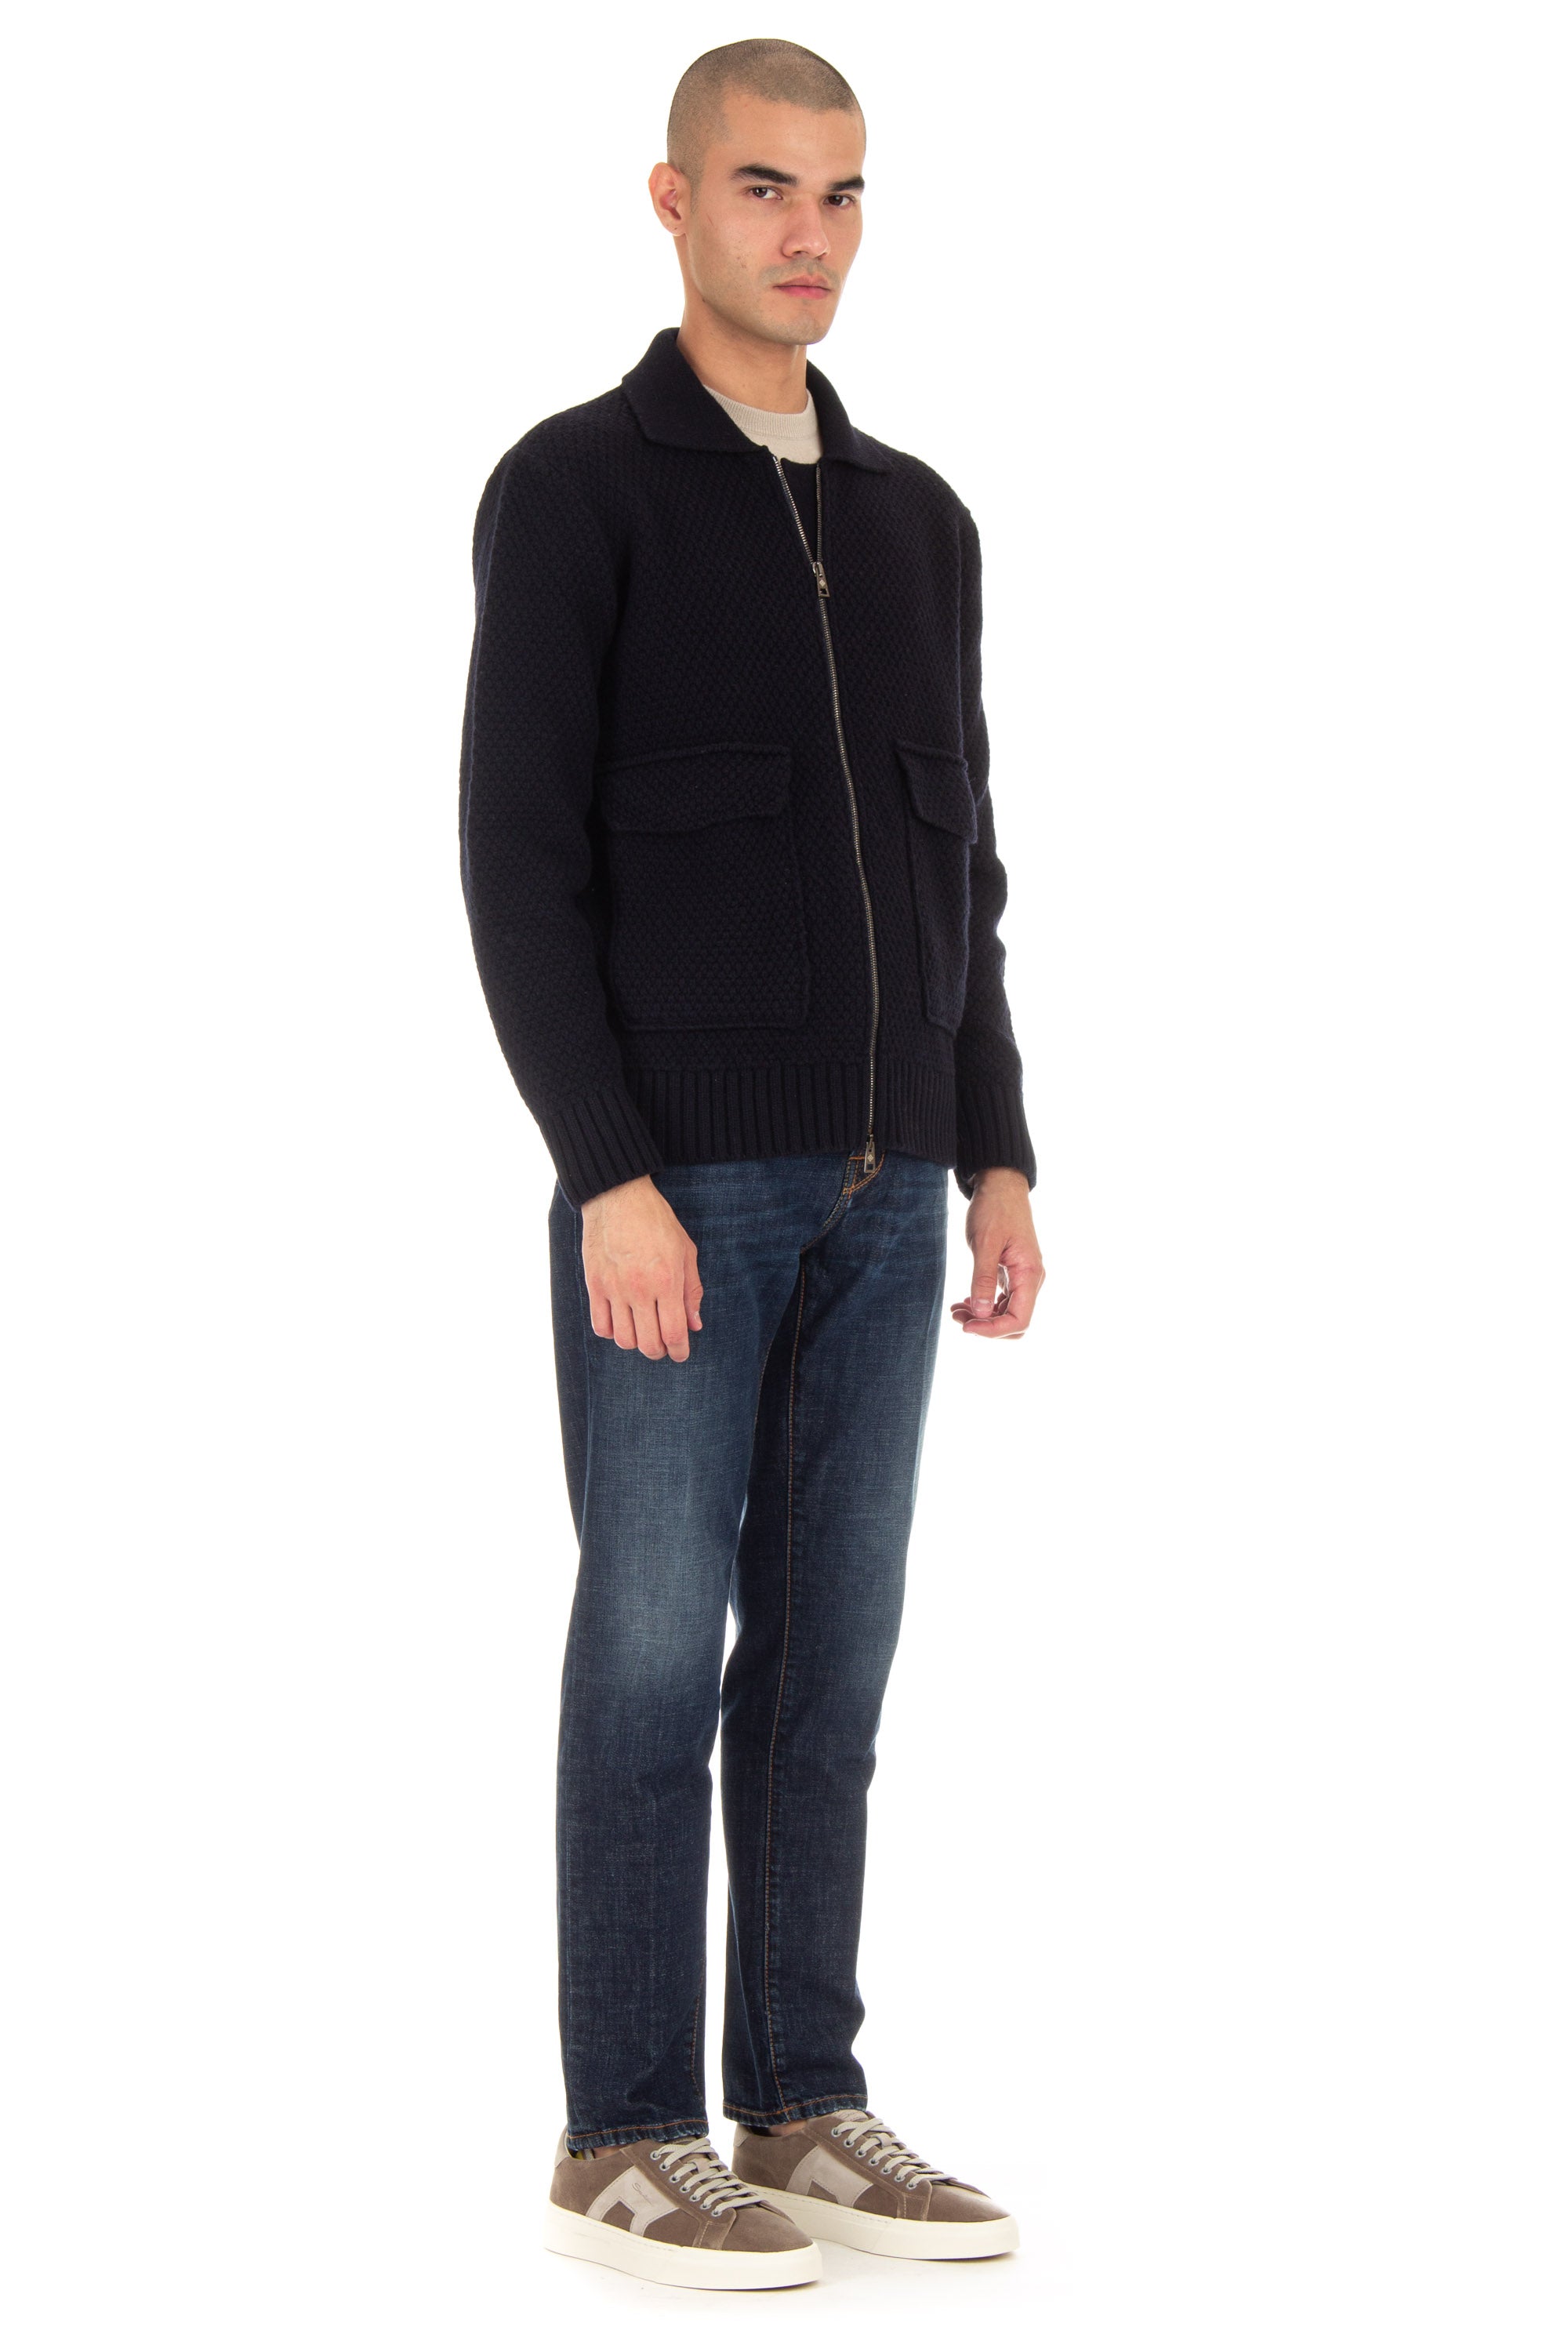 Knitted jacket in wool, amid